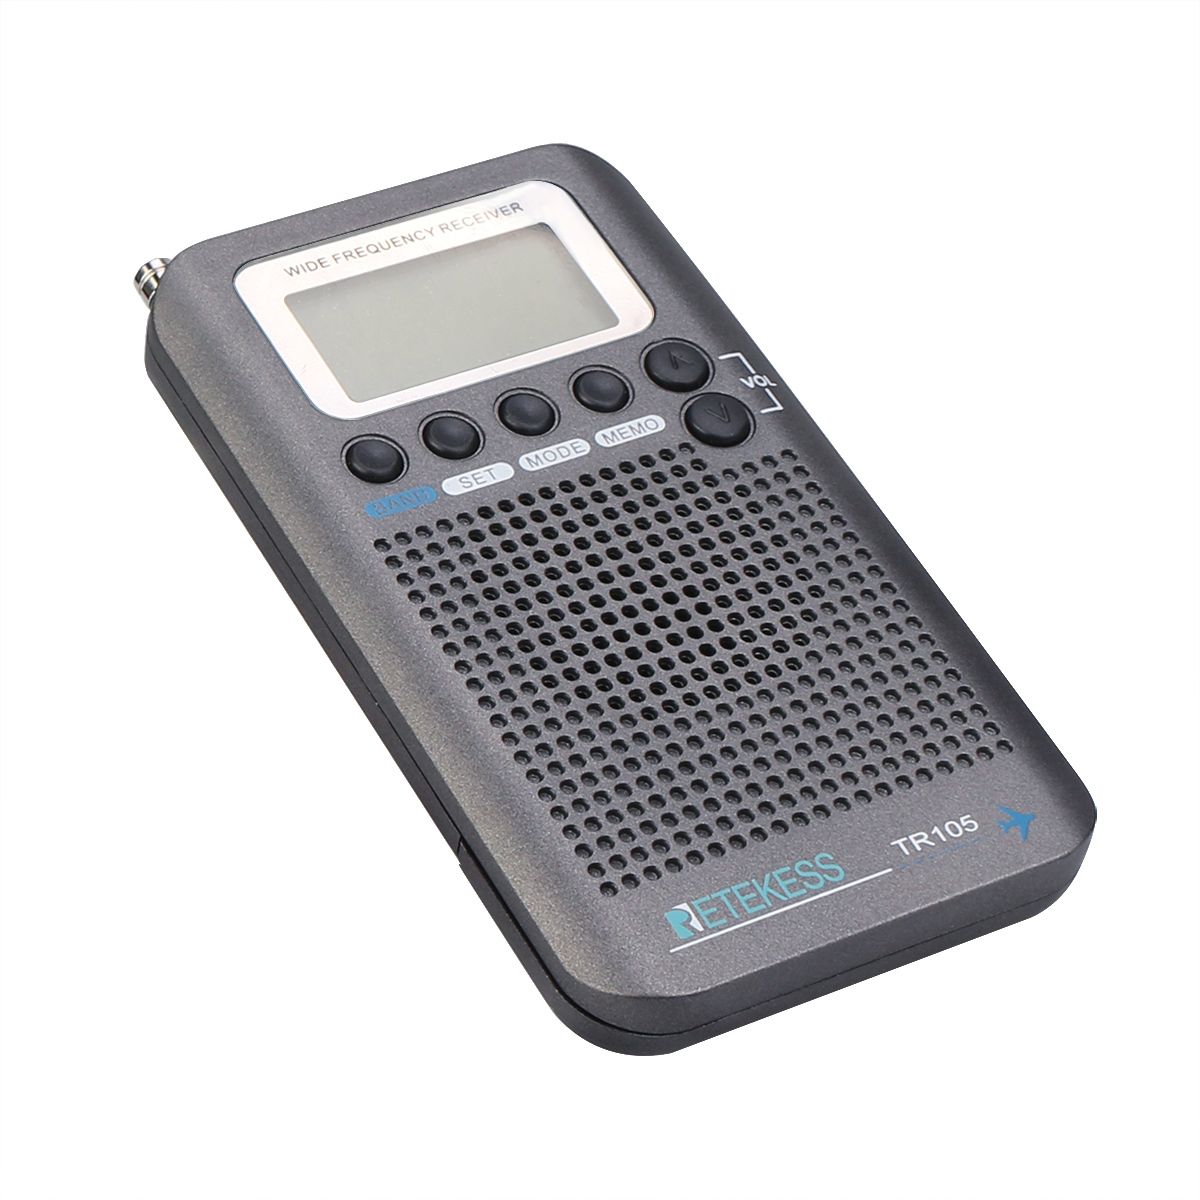 Retekess-TR105-Aircraft-Band-FM-AM-SW-Digital-Tuning-Radio-with-Timer-ON-OFF-Clock-Function-1646357